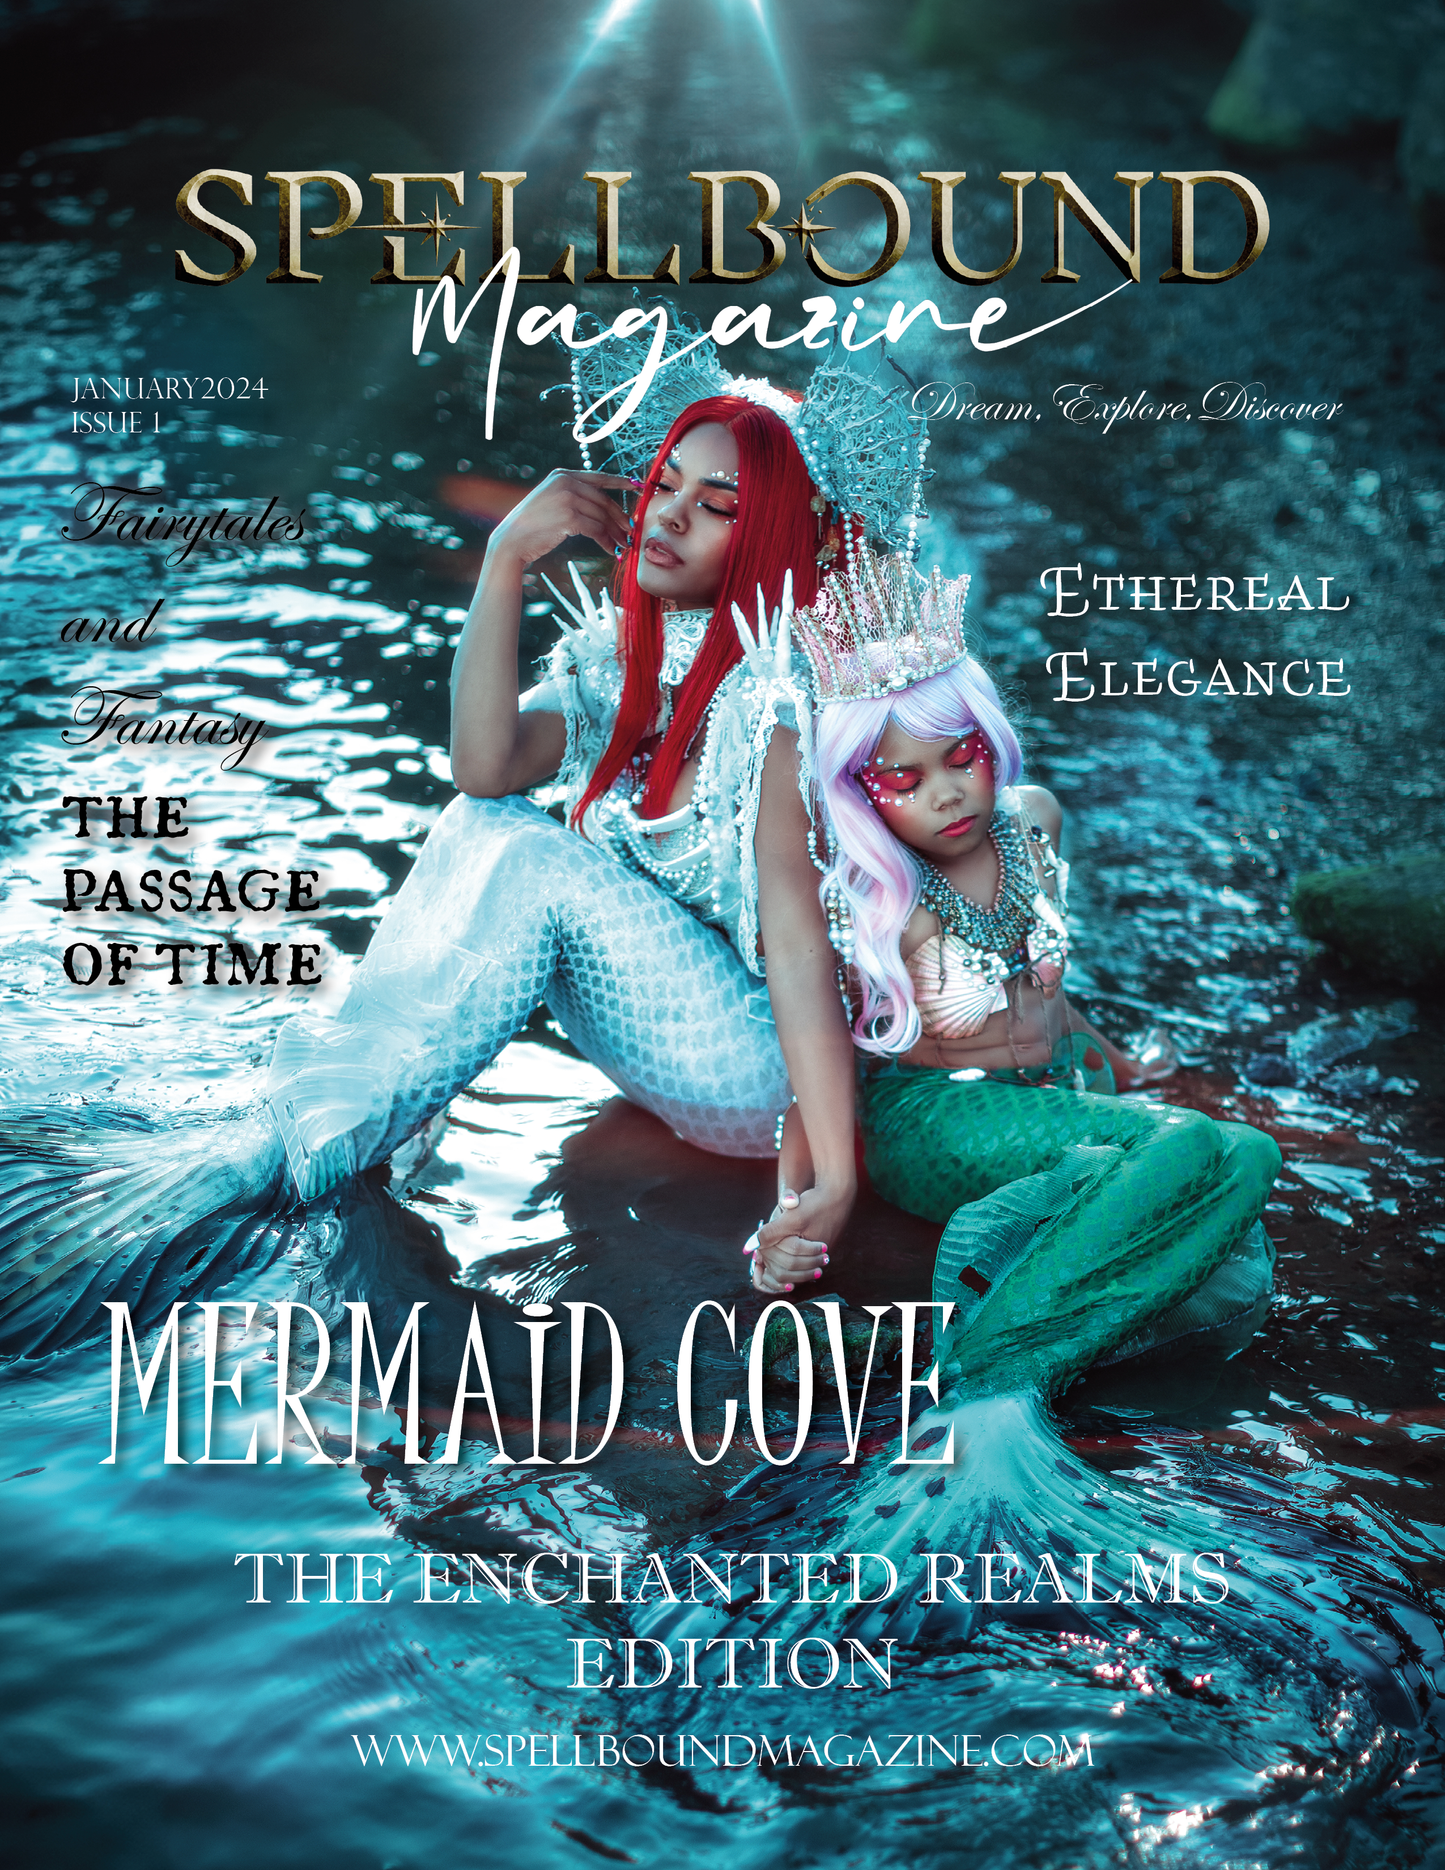 Spellbound Fairytales and Fantasy Magazine - January 2024: The Enchanted Realms Edition Issue 1⁠